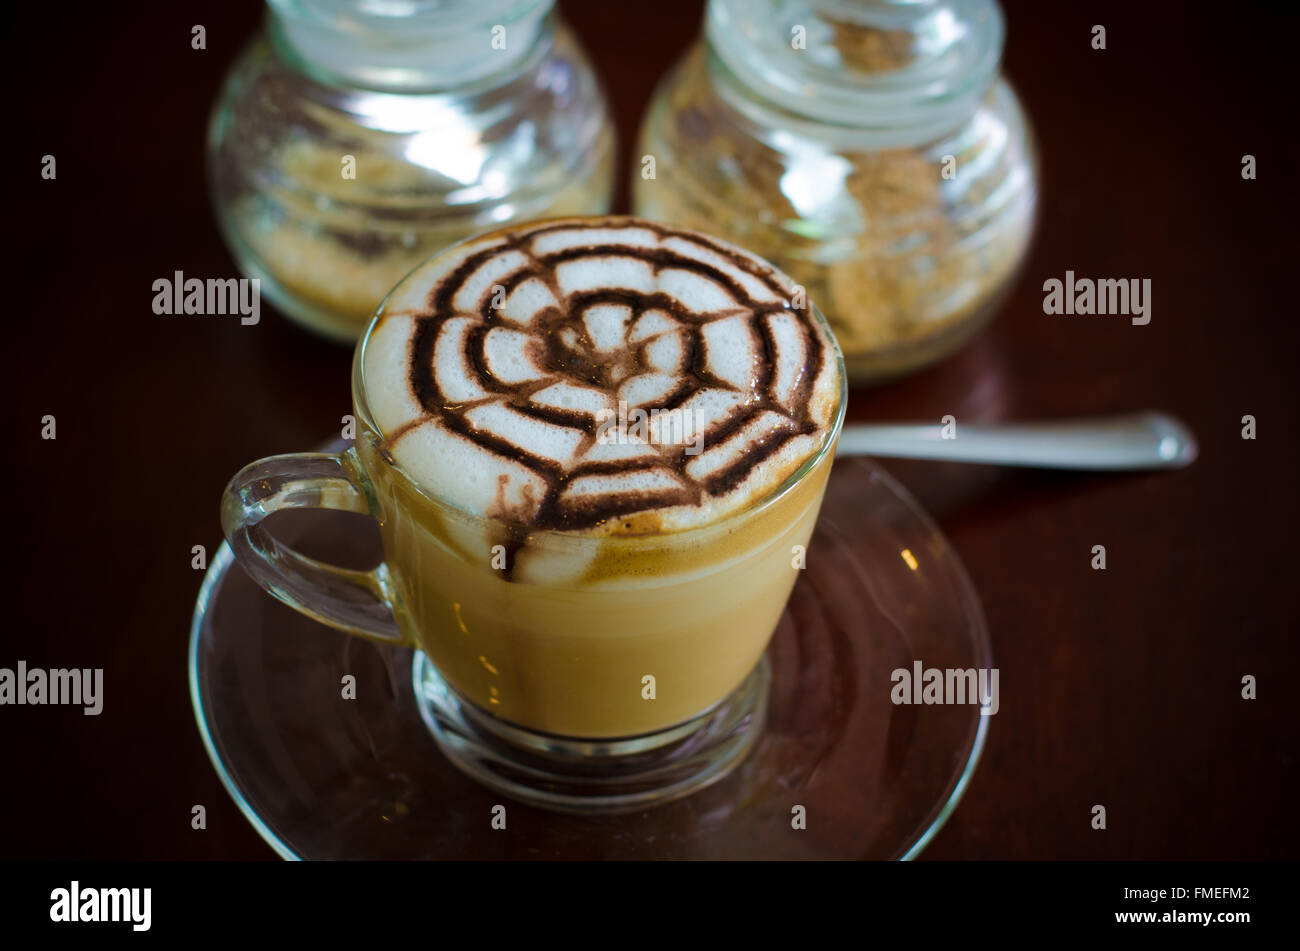 A glass of hot latte art coffee Stock Photo